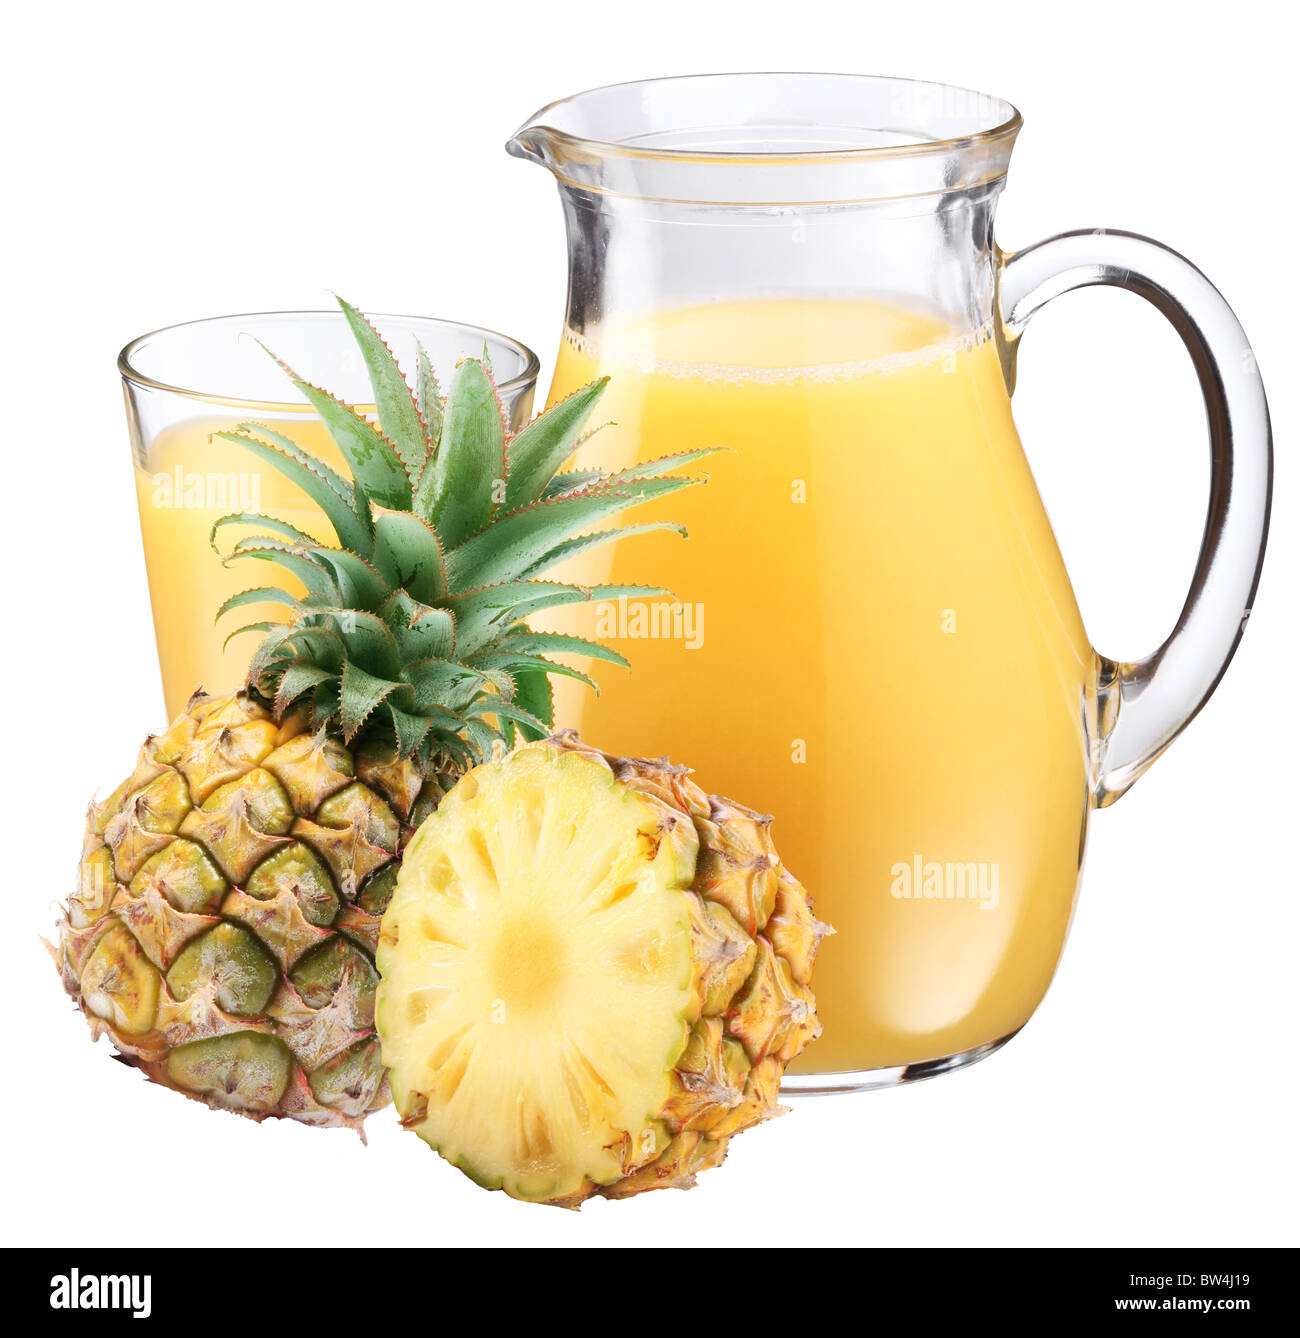 https://c8.alamy.com/comp/BW4J19/full-glass-and-jar-of-pineapple-juice-and-pineapple-fruit-in-front-BW4J19.jpg